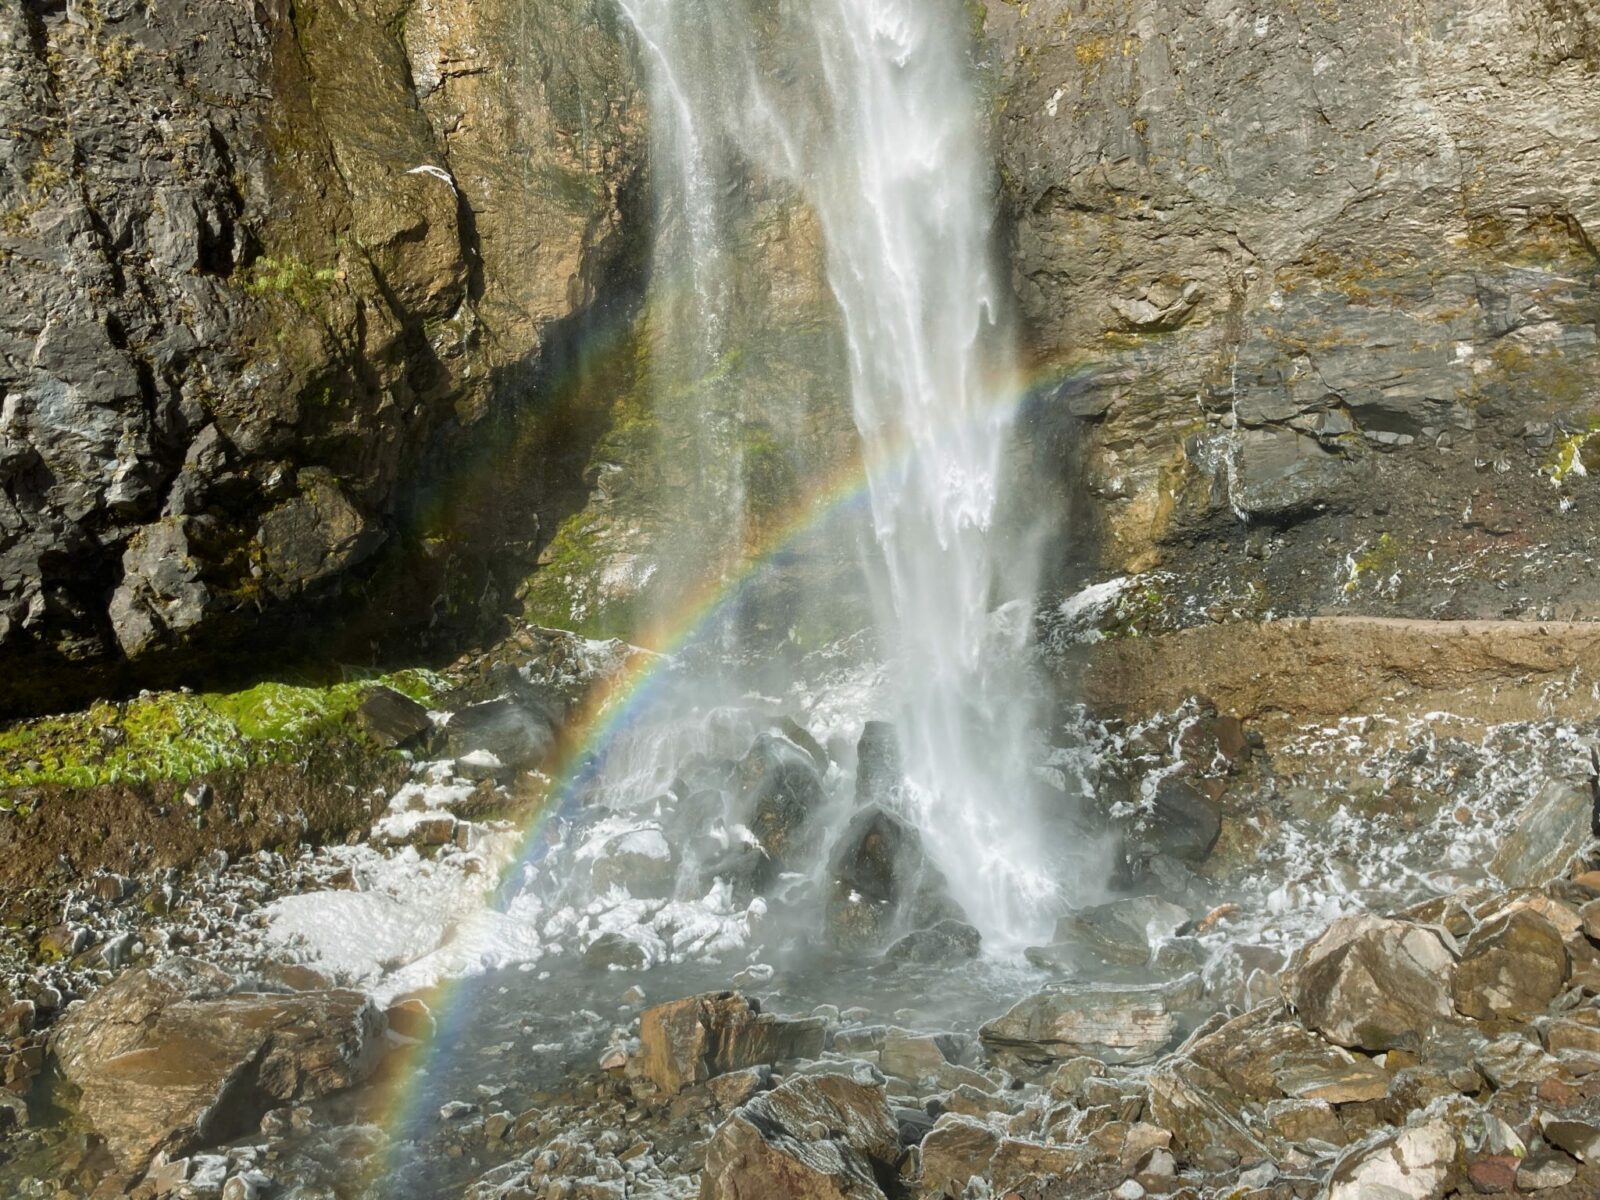 Comet Falls, a Mt Rainier waterfall, plunges onto rocks on a sunny day, creating a rainbow across the bottom of the waterfall